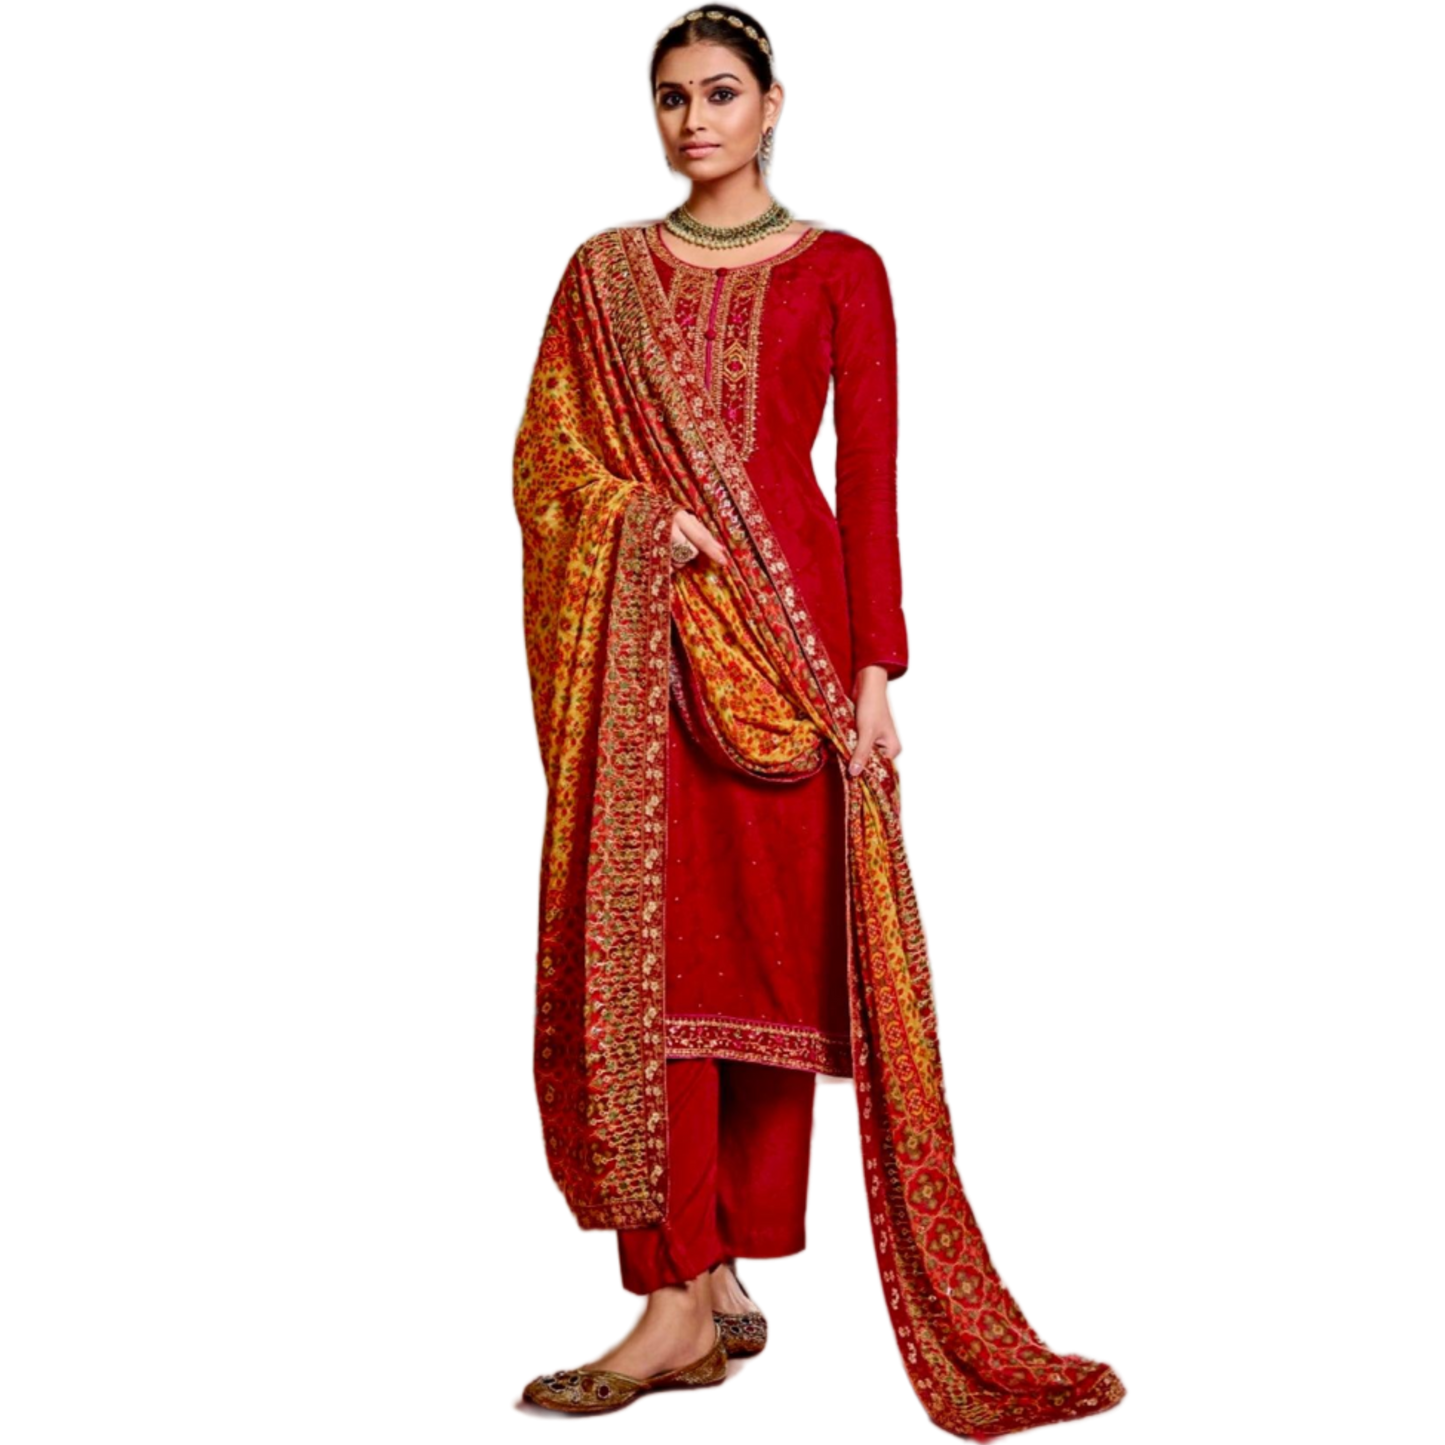 Red Jacquard Silk with embroidery and Sequins dress, Indian Original catalogue Three Piece suit dress with Floral print Chiffon Dupatta, M L